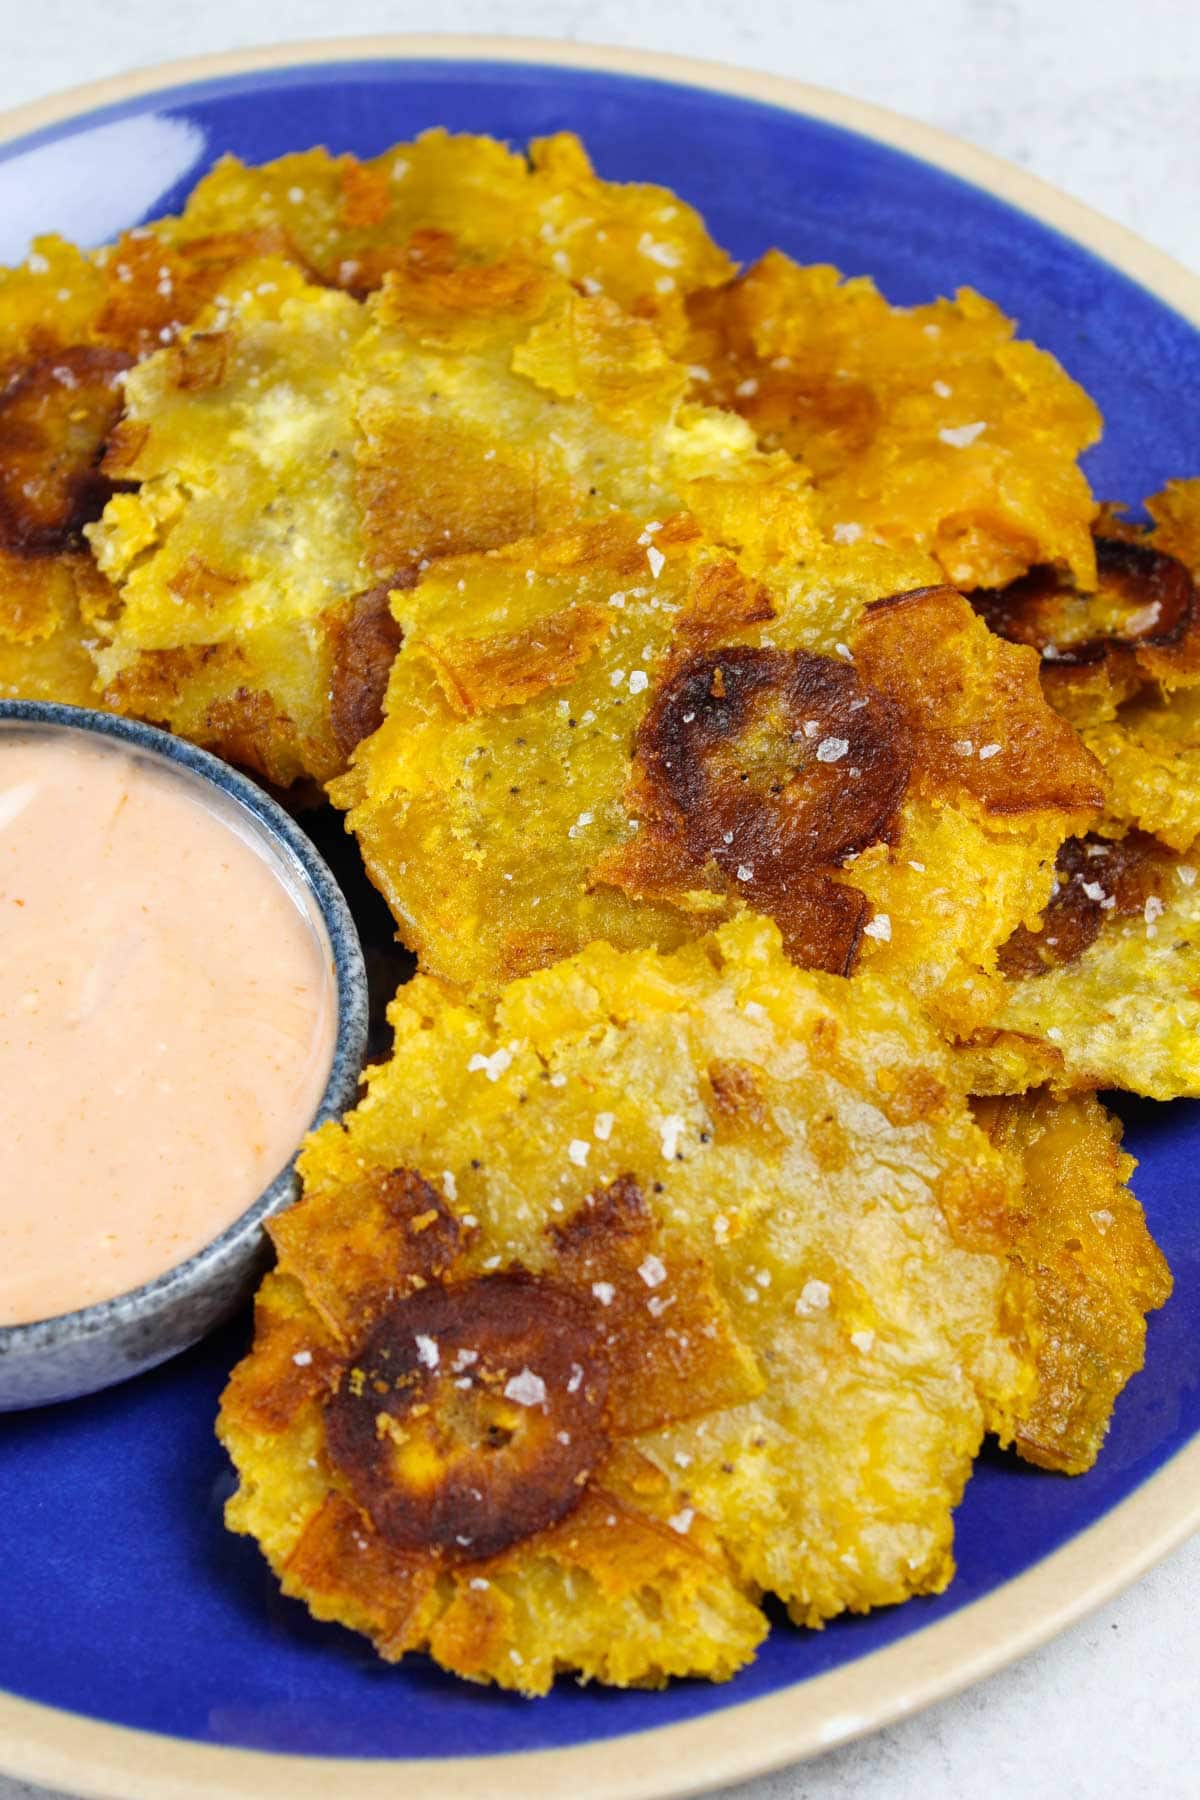 Tostones stacked on a blue plate with a small bowl of mayo-ketchup sauce.